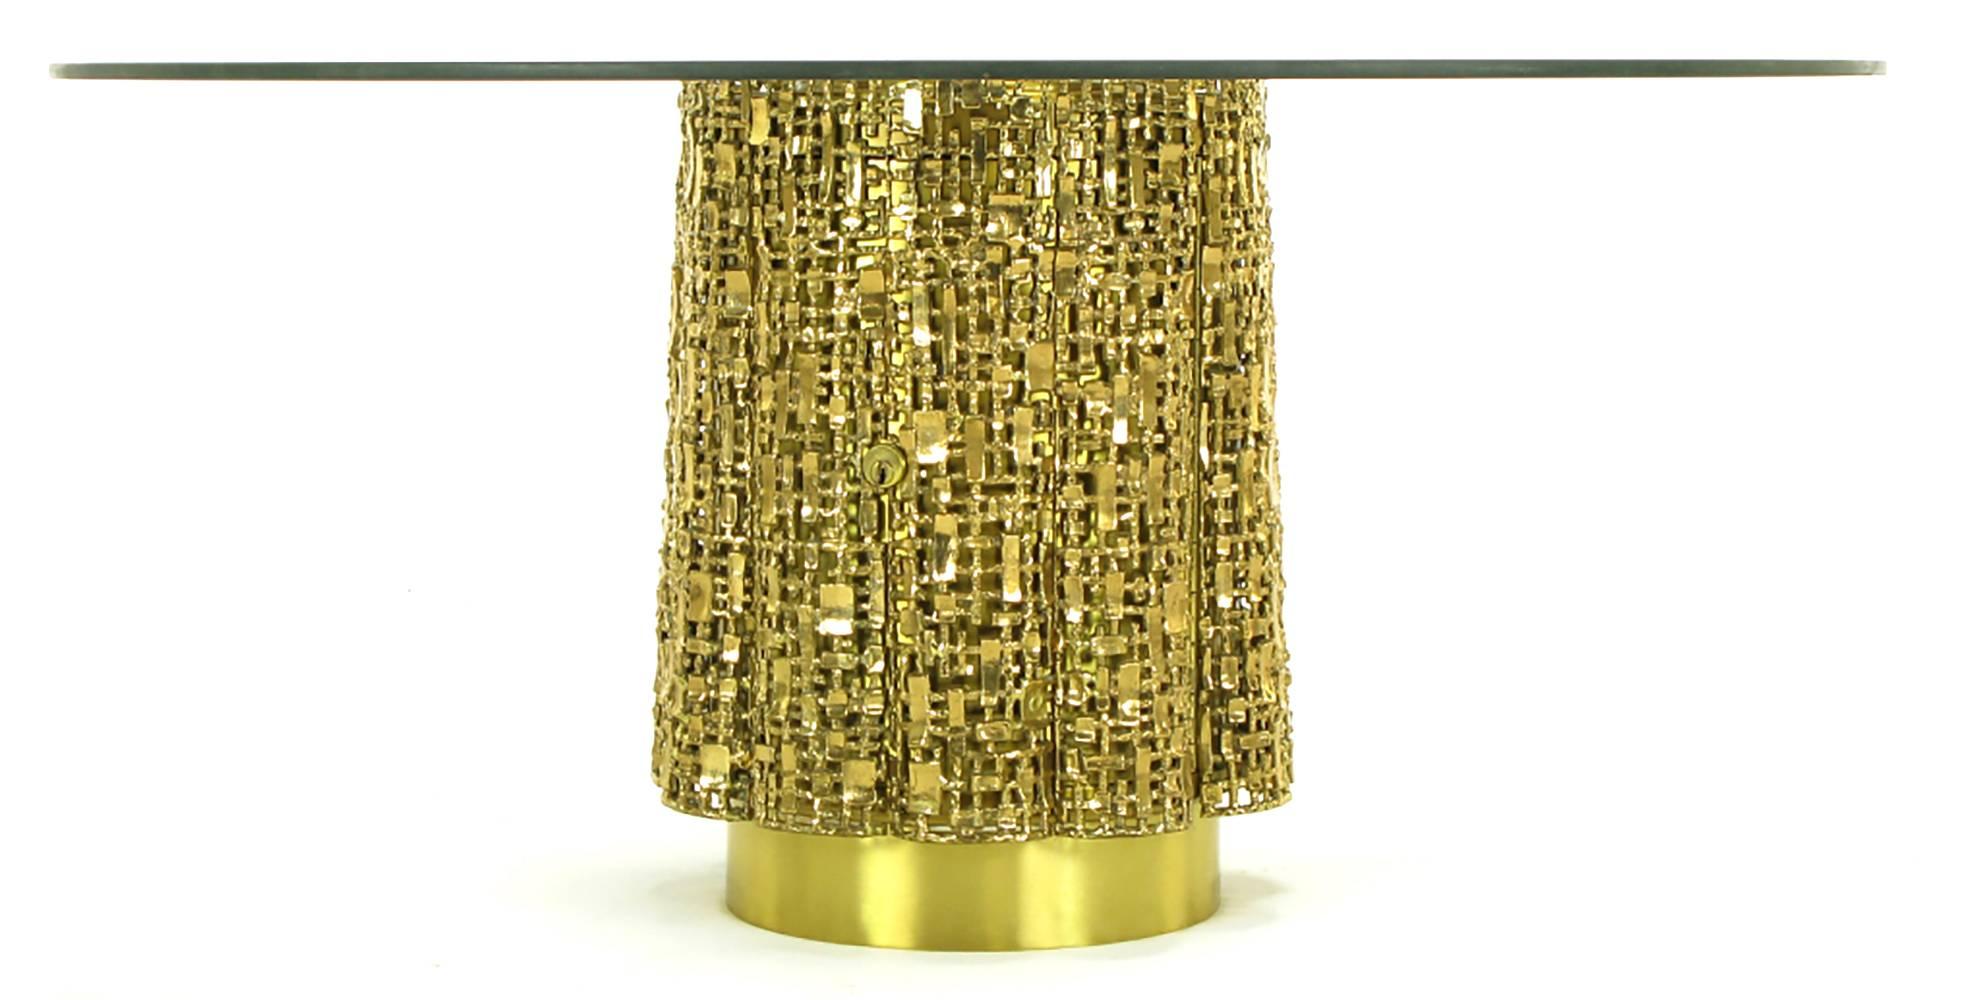 Elegant, one of a kind custom pierced brass pedestal base coffee table in the manner of Silas Seandel. Cast brass quarter round panels encircle the brass clad center wood cylinder. Concealed keyed and hinged door open to reveal simulated calf